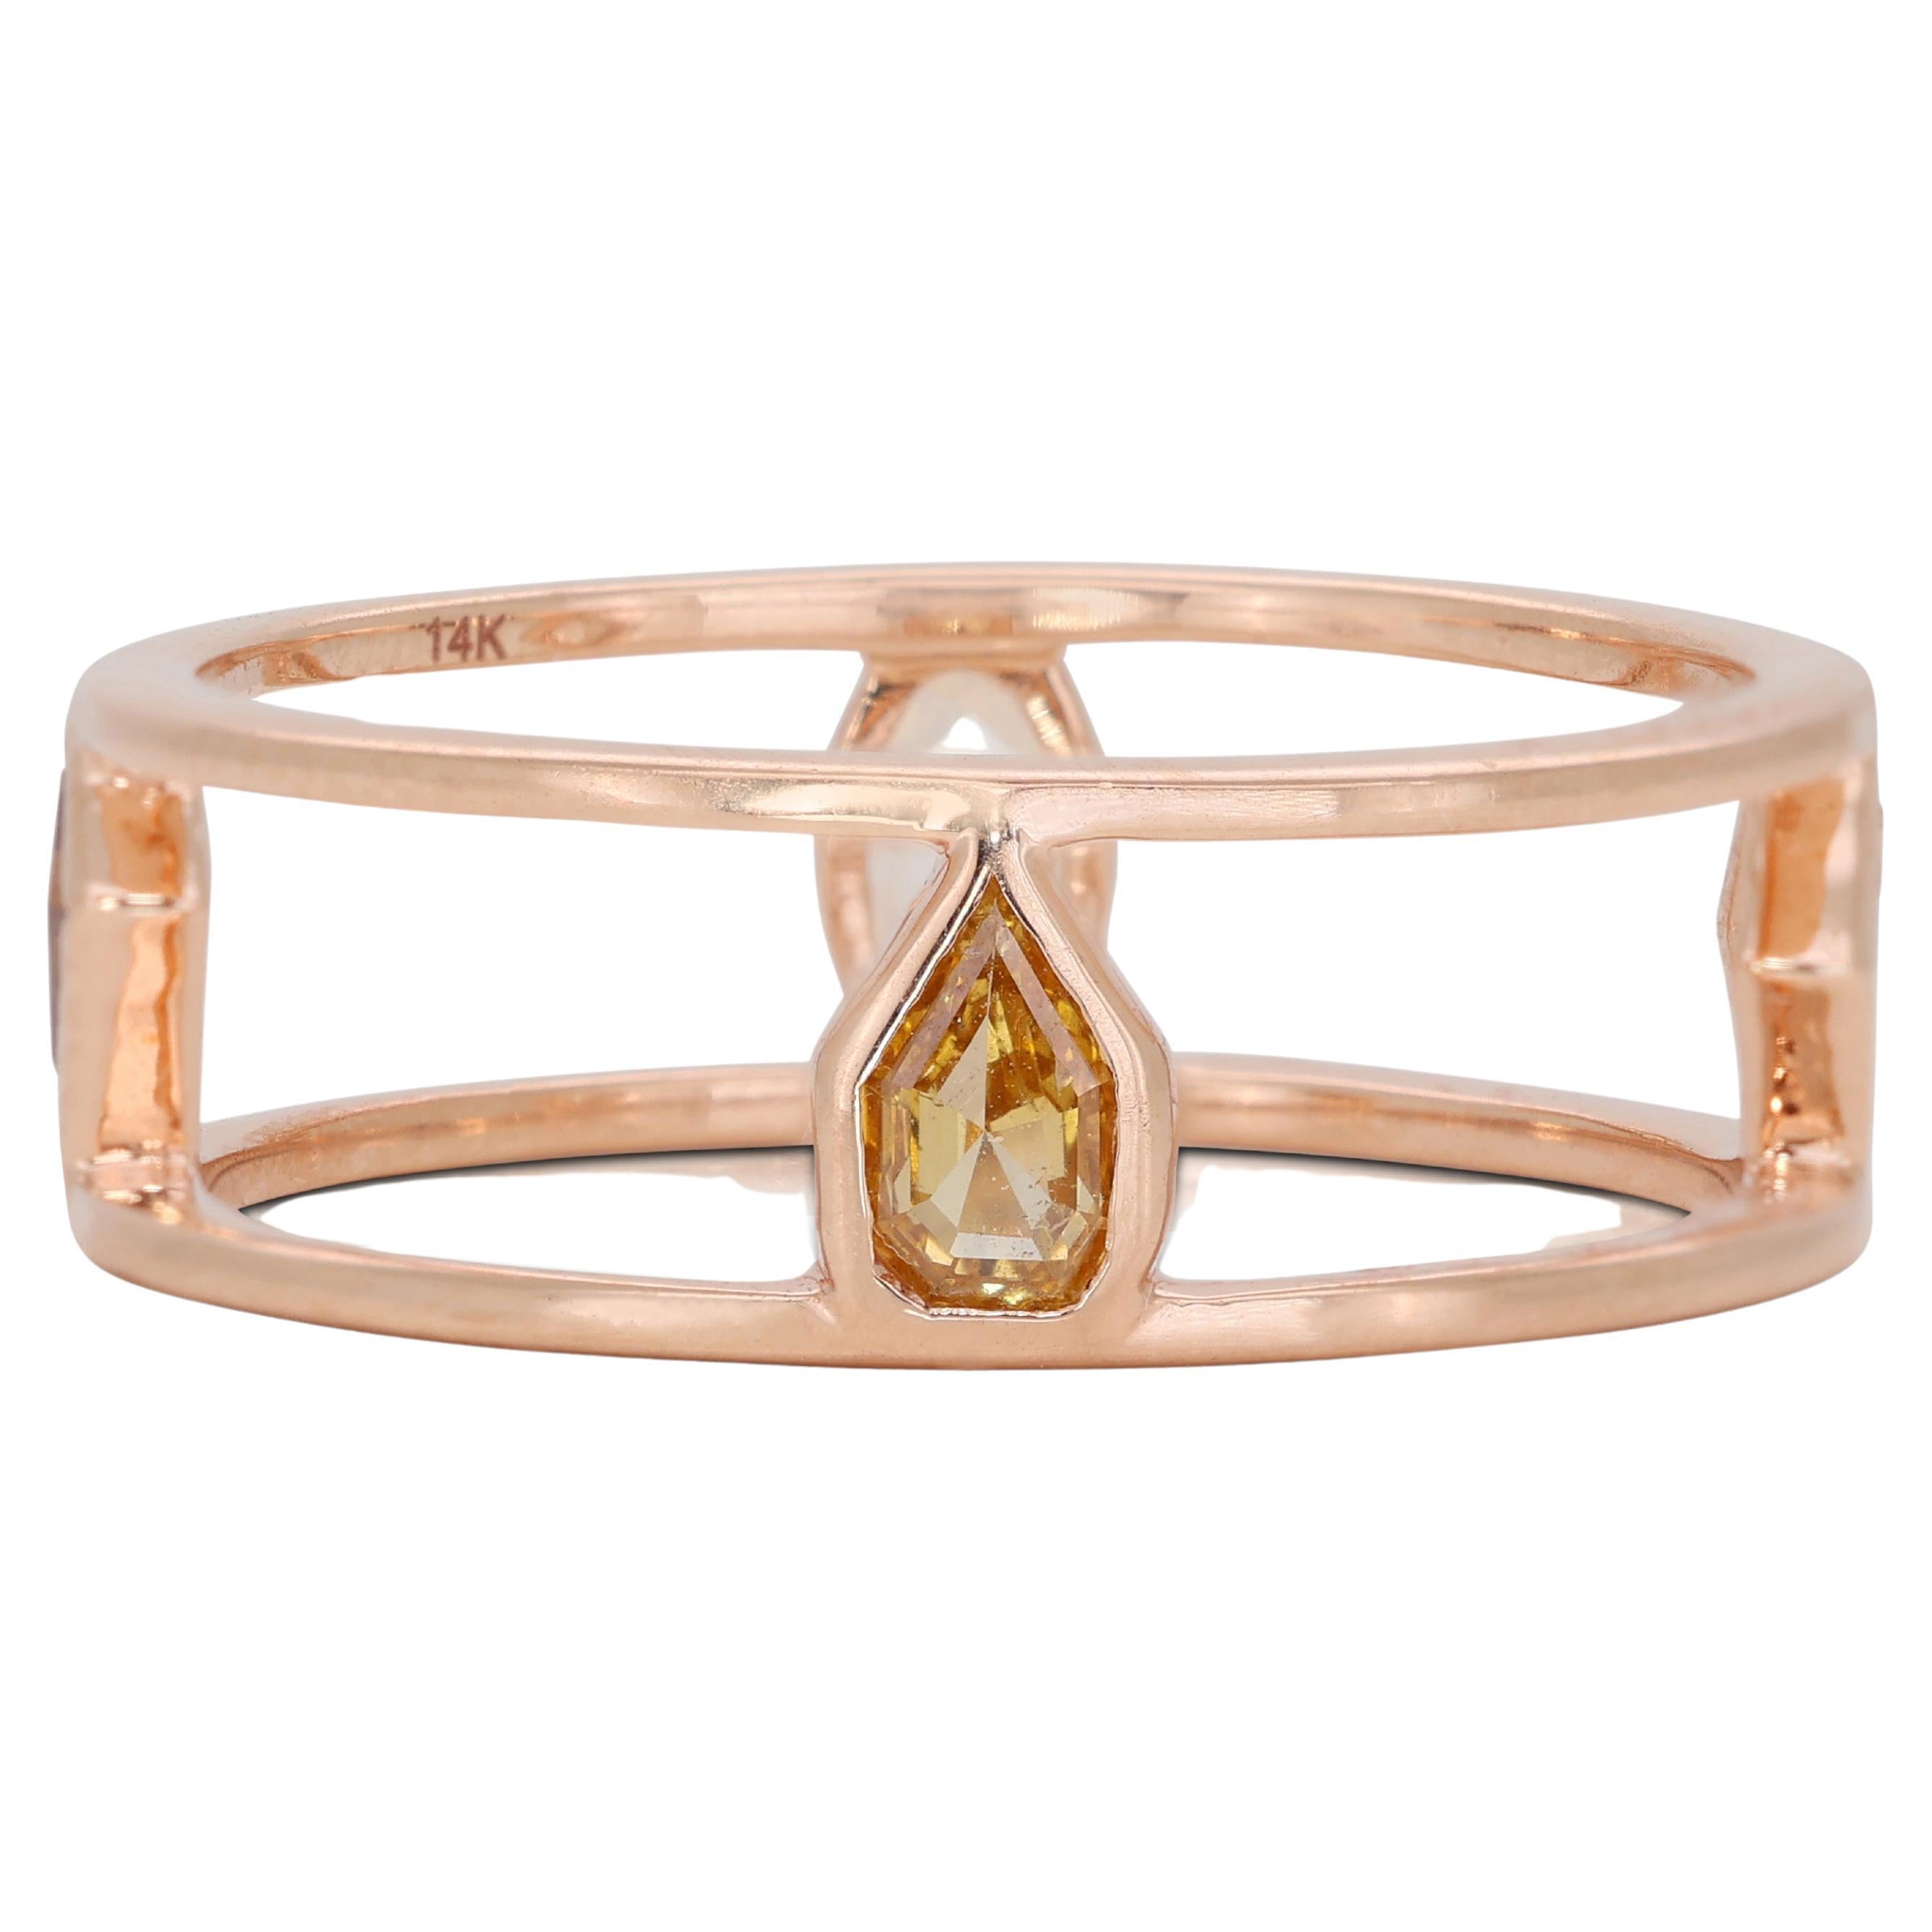 Lovely 14k Rose Gold Fancy Colored Diamond Ring w/0.56 ct - IGI Certified For Sale